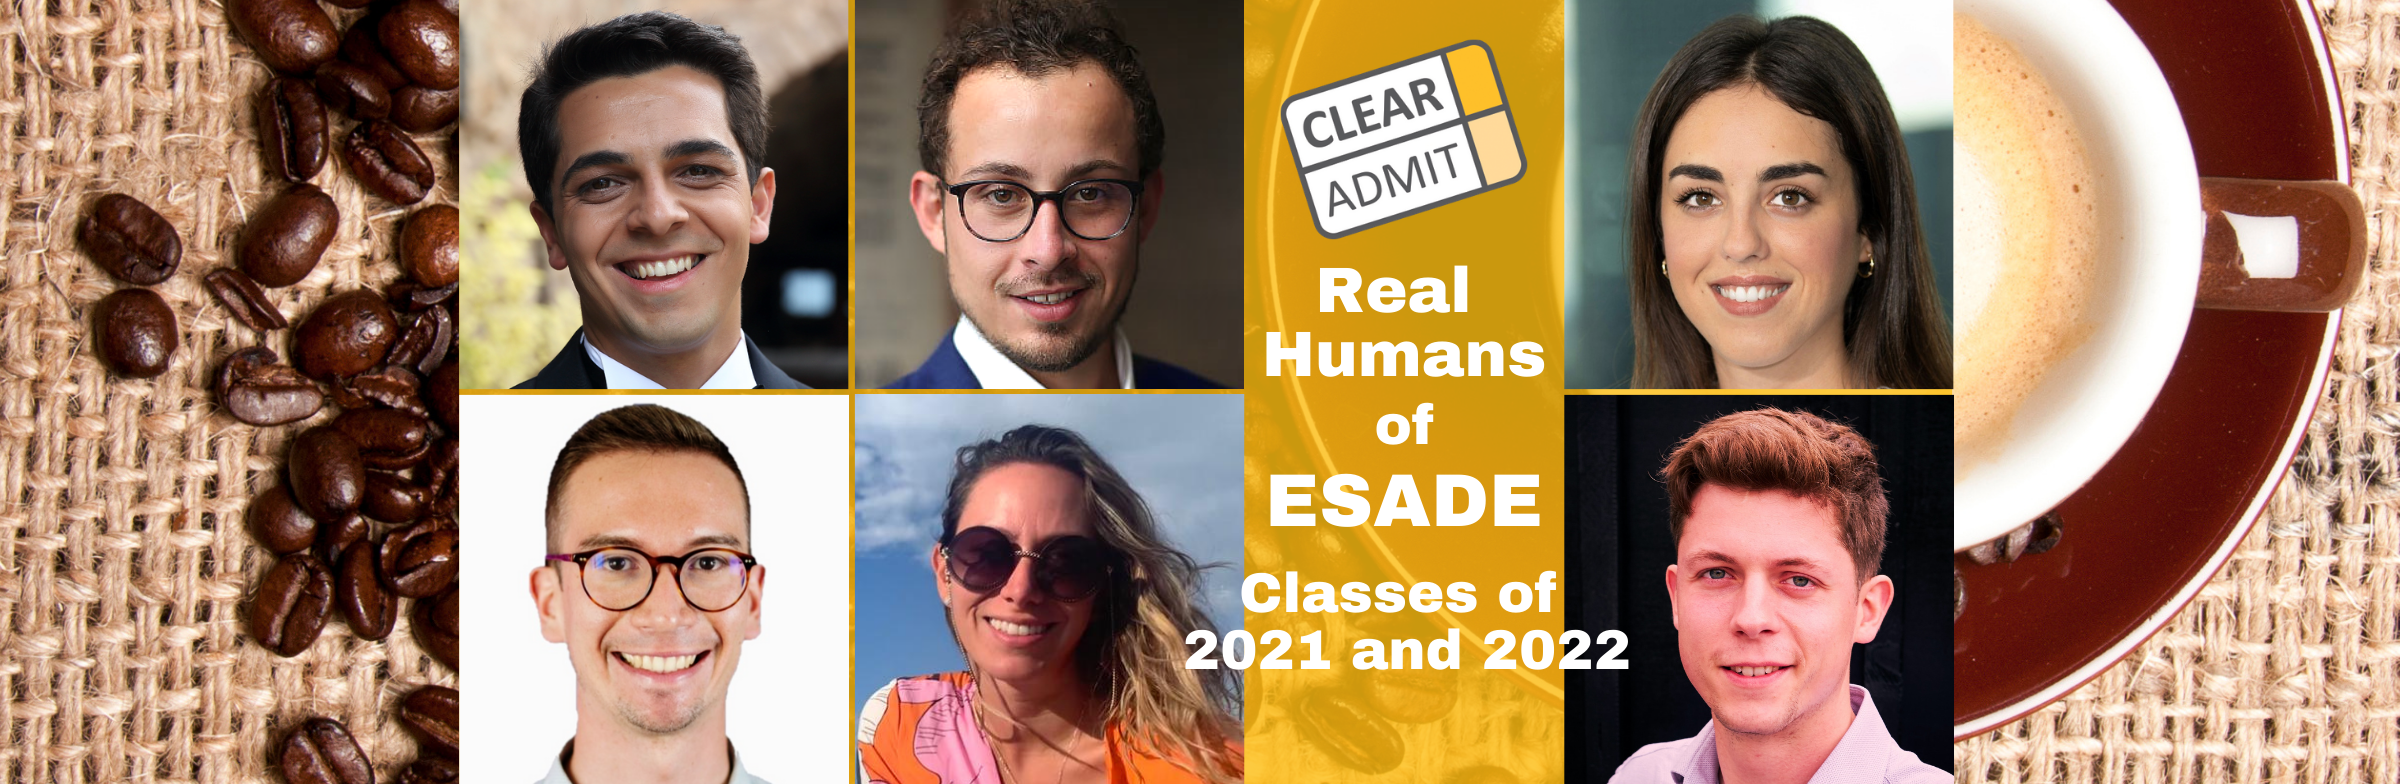 Image for Real Humans of Esade’s MBA Class of 2021/2022